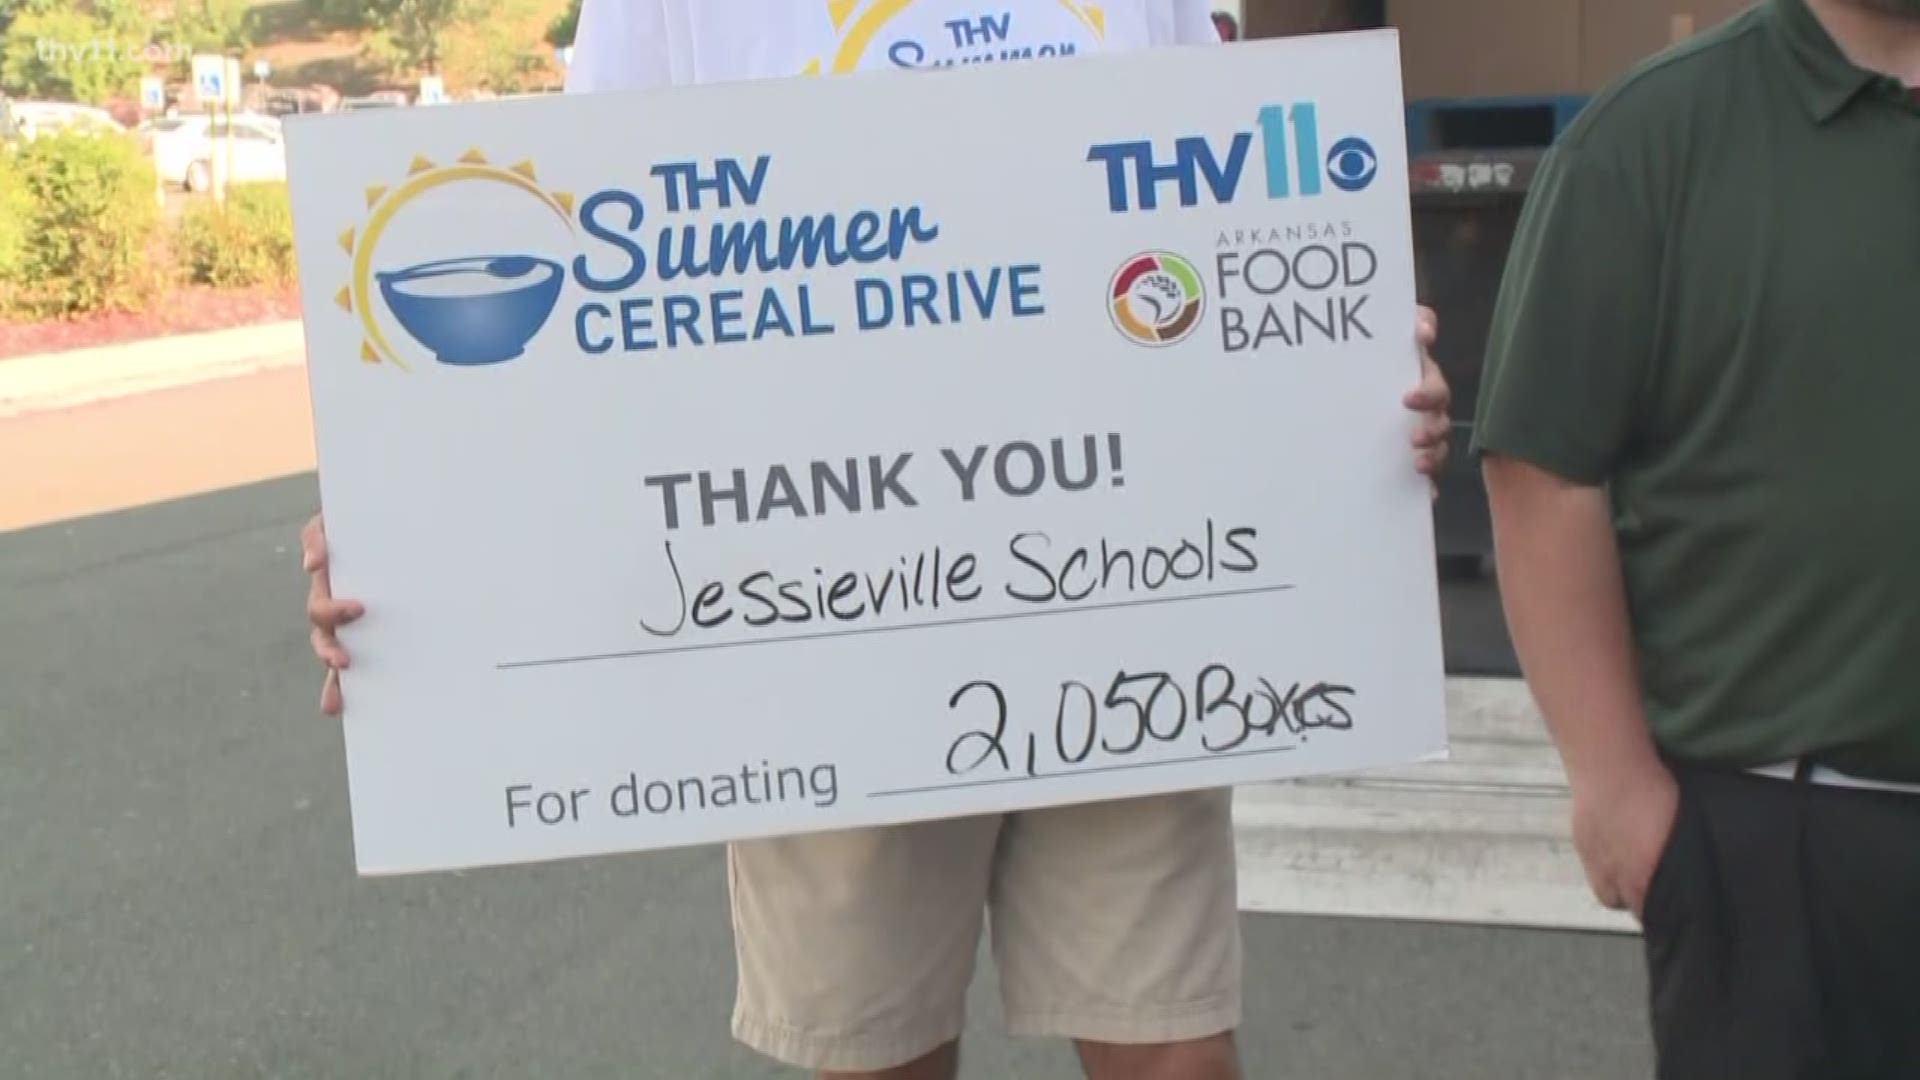 Rob Evans and Raven Richard shared Jessieville Schools made a huge donation.